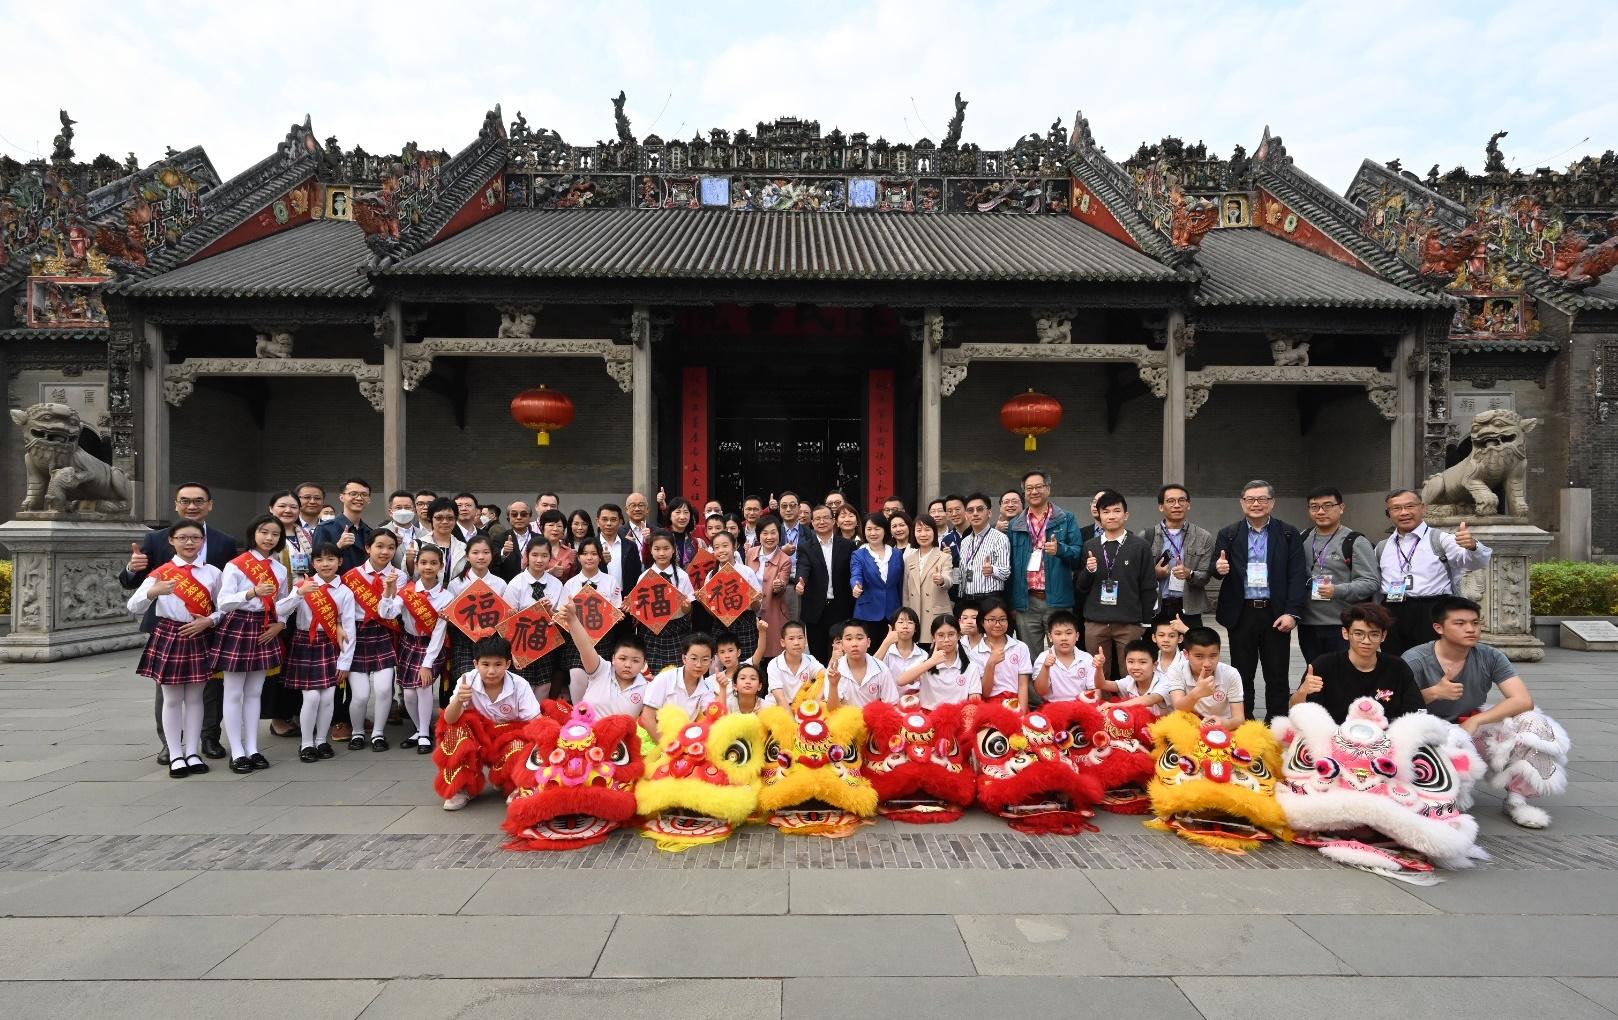 The Secretary for Education, Dr Choi Yuk-lin, today (March 9) led a delegation to visit Shenzhen and Guangzhou to inspect the relevant arrangements for Mainland study tours of the senior secondary subject of Citizenship and Social Development,  including touring the intangible cultural heritage at Chen Clan Temple. Photo shows Dr Choi (second row, eleventh right), the Permanent Secretary for Education, Ms Michelle Li (second row, twelfth right), Deputy Secretary for Education Ms Teresa Chan (second row, eighth right), the First-level Inspector of the Department of Education of Guangdong Province, Mr Zhu Chaohua (second row, thirteenth right), and other members of the delegation with student performers of a lion dance show.